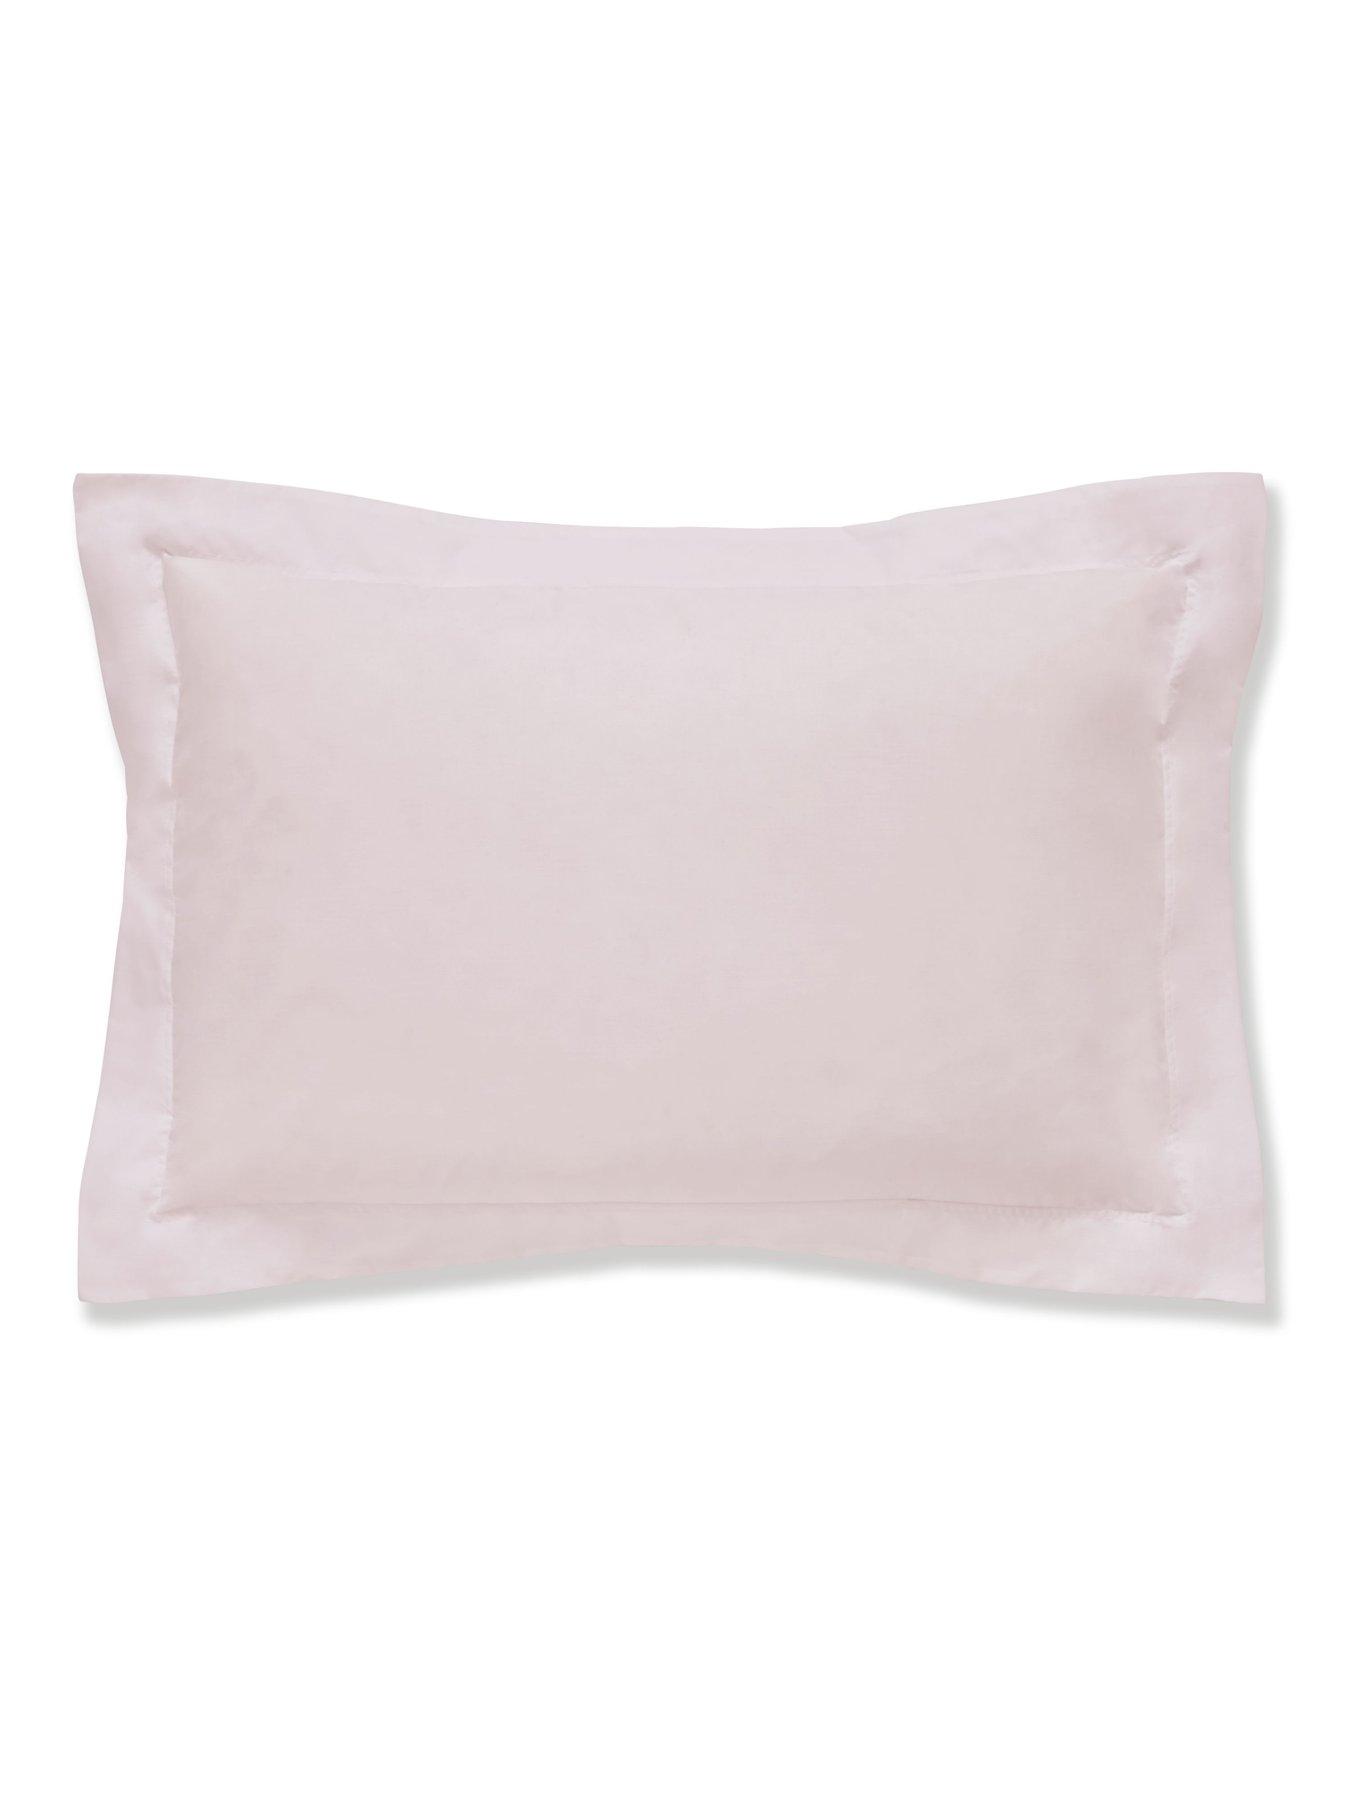 Details about   2x Oxford Pillowcase Cover 100% Poly Cotton Super Soft Bedroom pillow  Pair Pack 